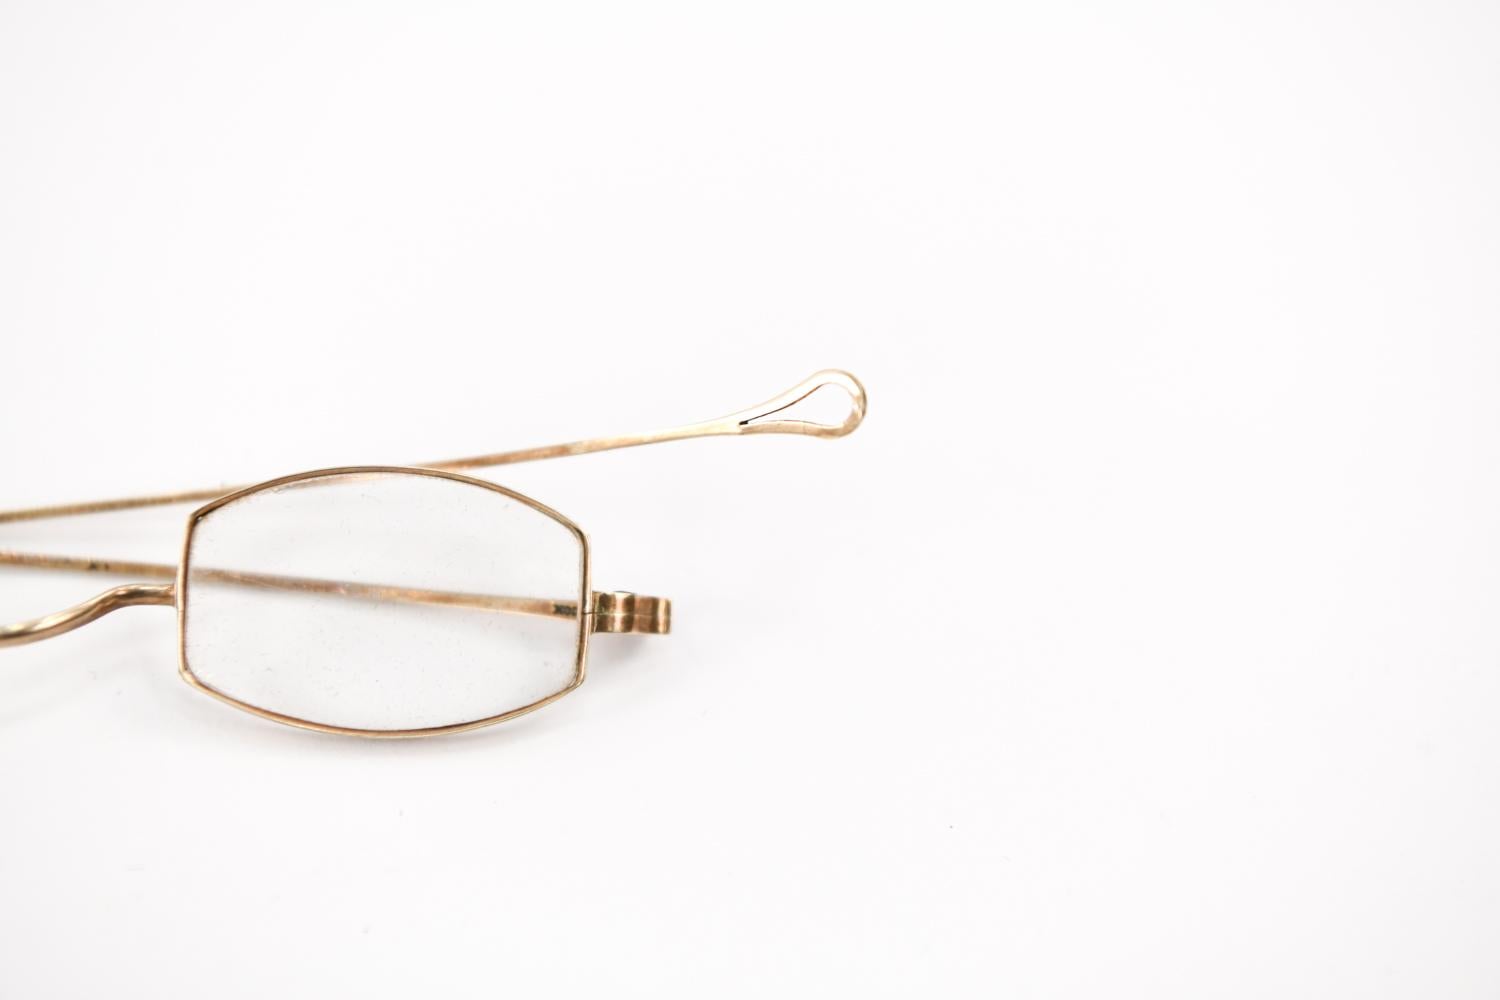 These exceptional antique spectacles feature solid 14K yellow gold wire-rim frames and a subtly rounded rectangular shape. The wire is stamped 